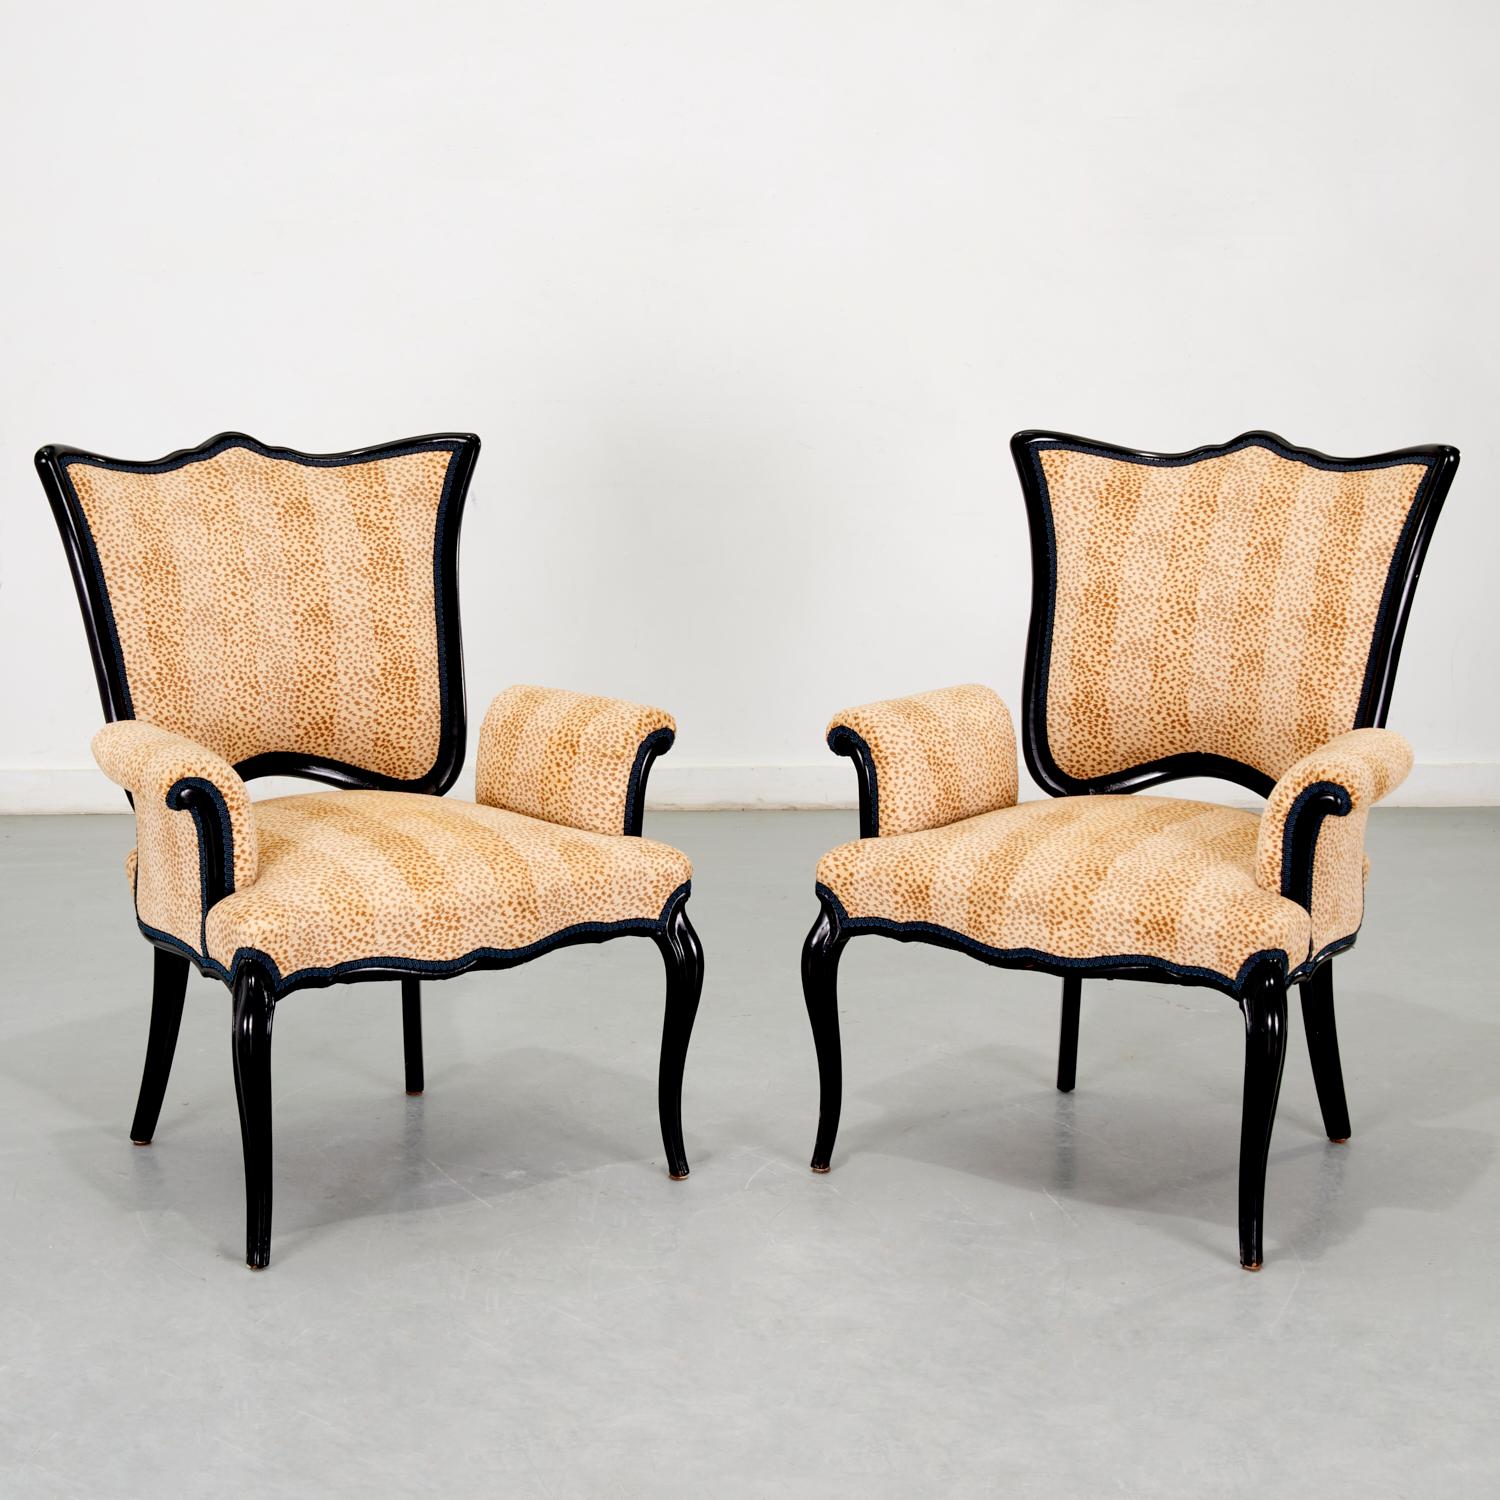 20th c., a pair of Hollywood Regency black lacquer armchairs with cotton velvet cheetah print upholstery accented with French navy braided trim. The chairs are larger than standard chairs of this type which works beautifully with the sinuous curves